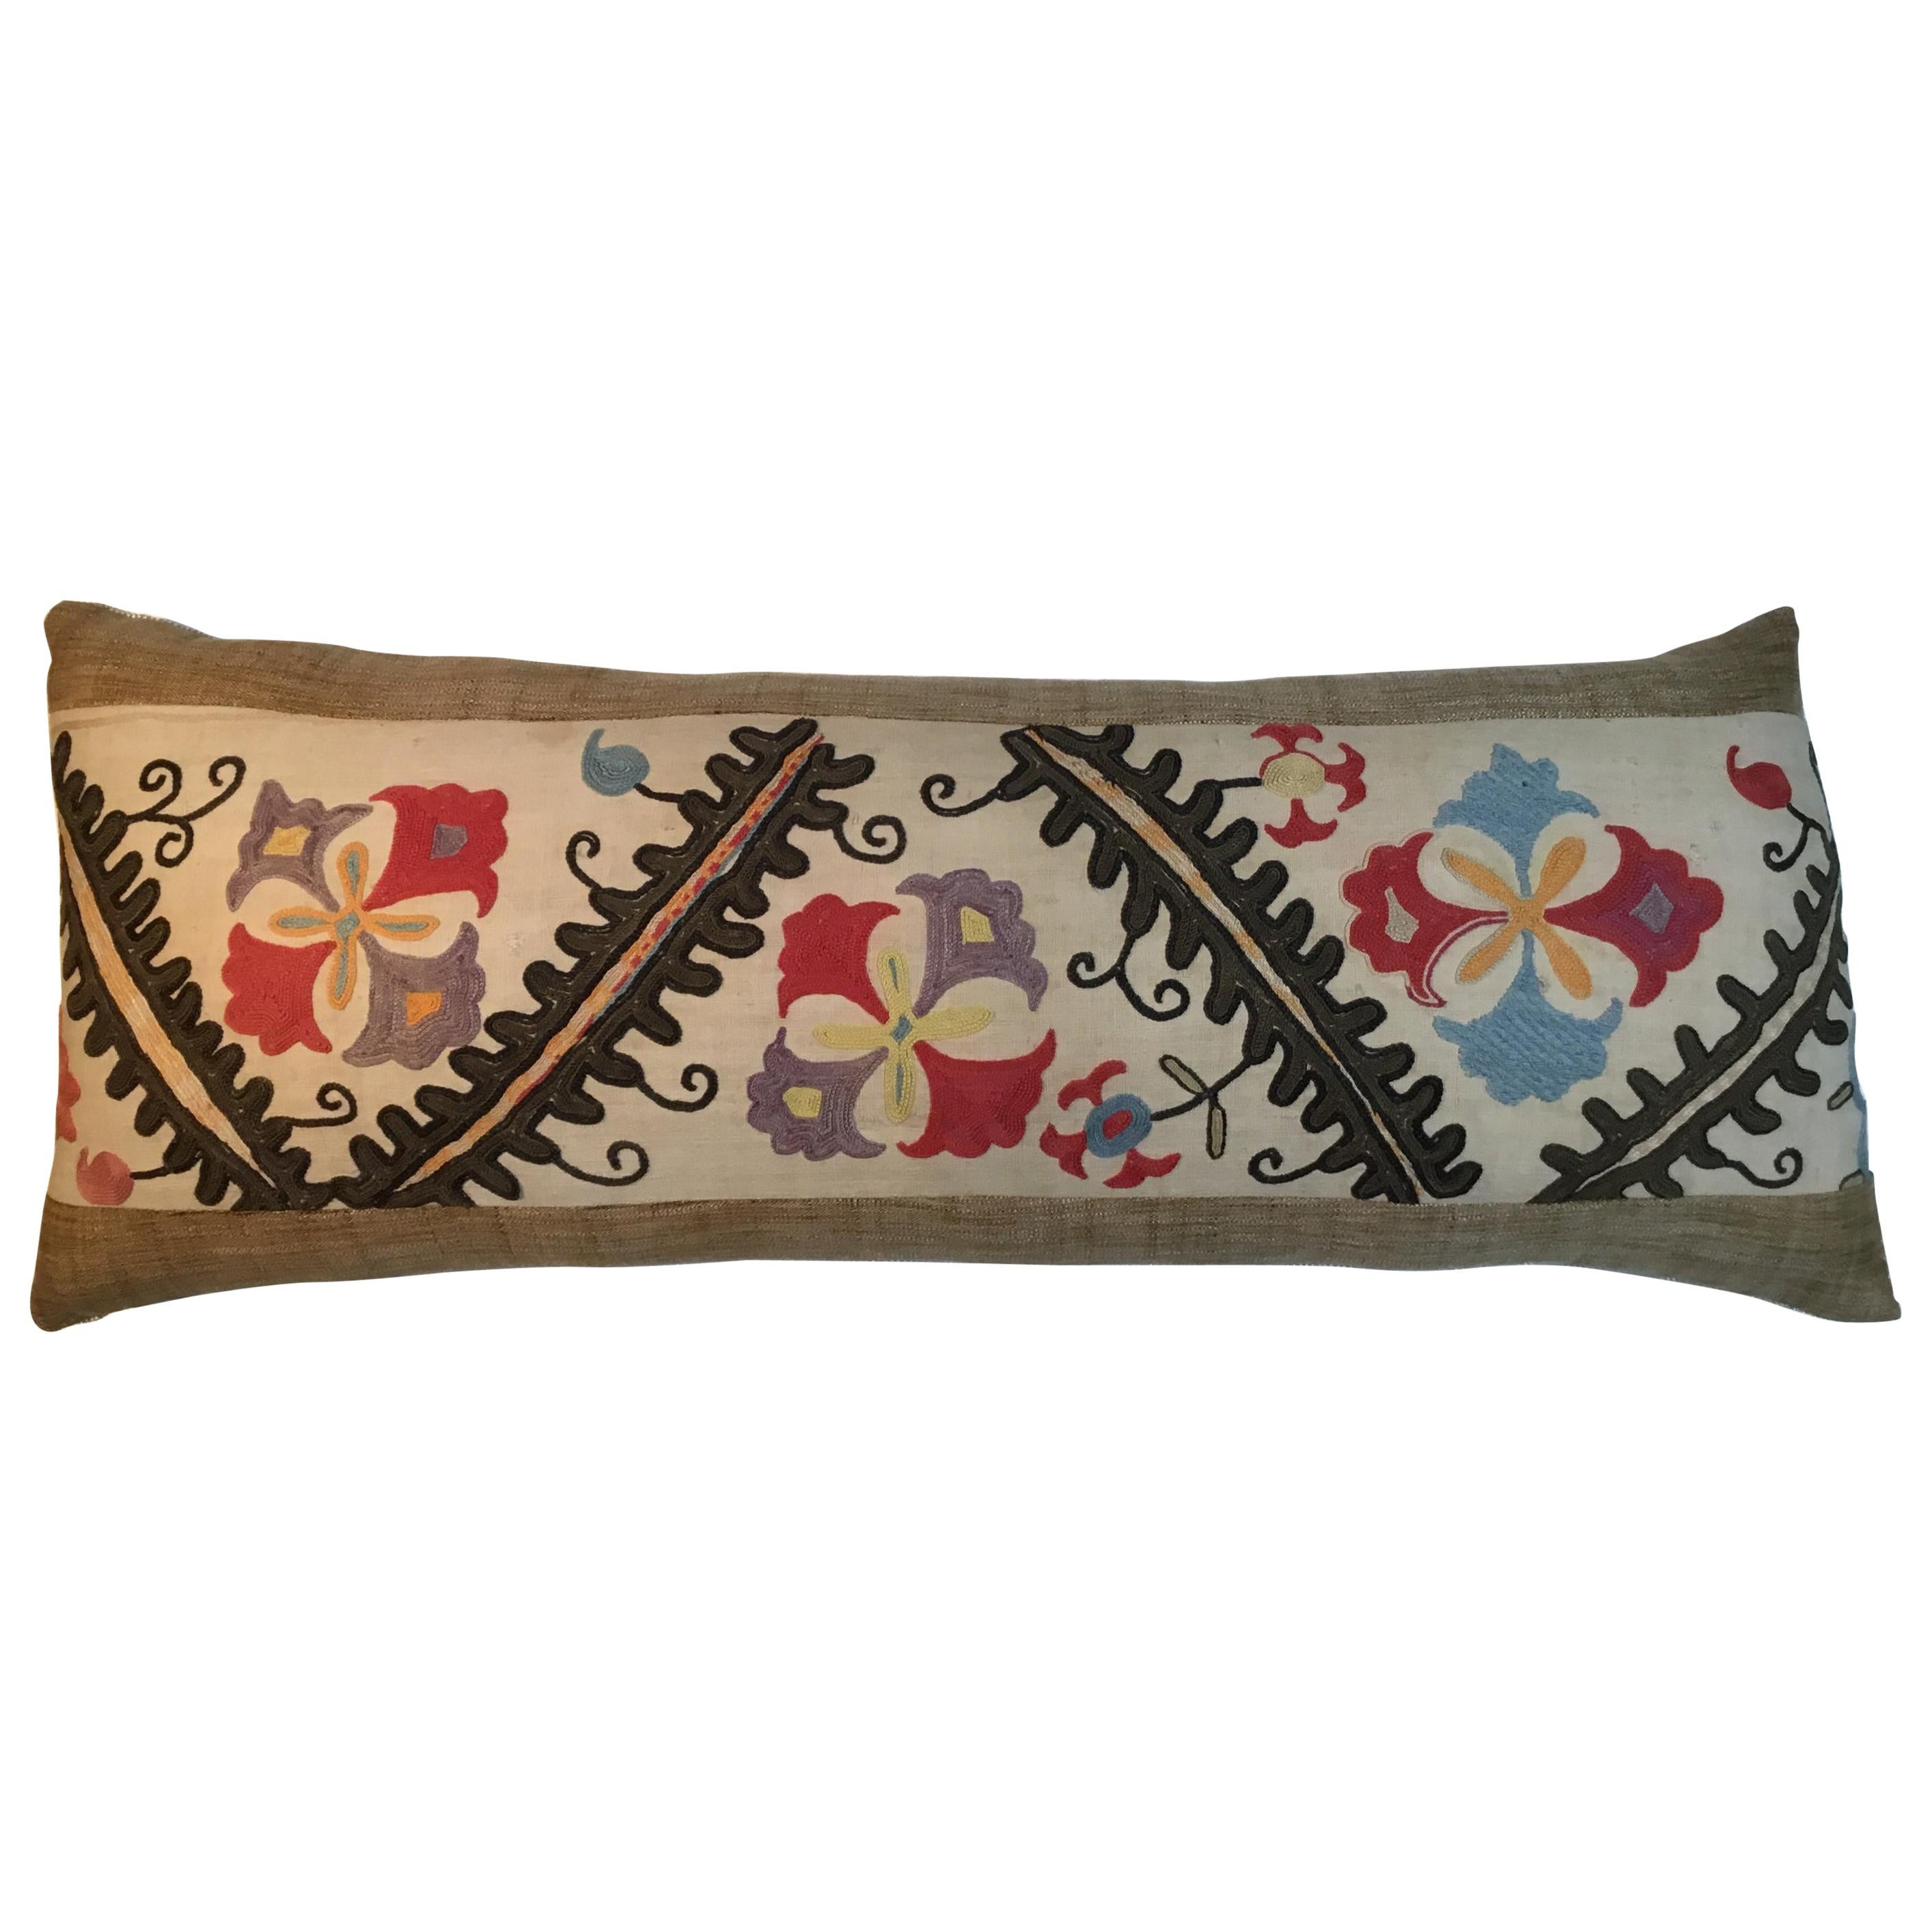 Antique Hand Embroidery Suzani Pillow 